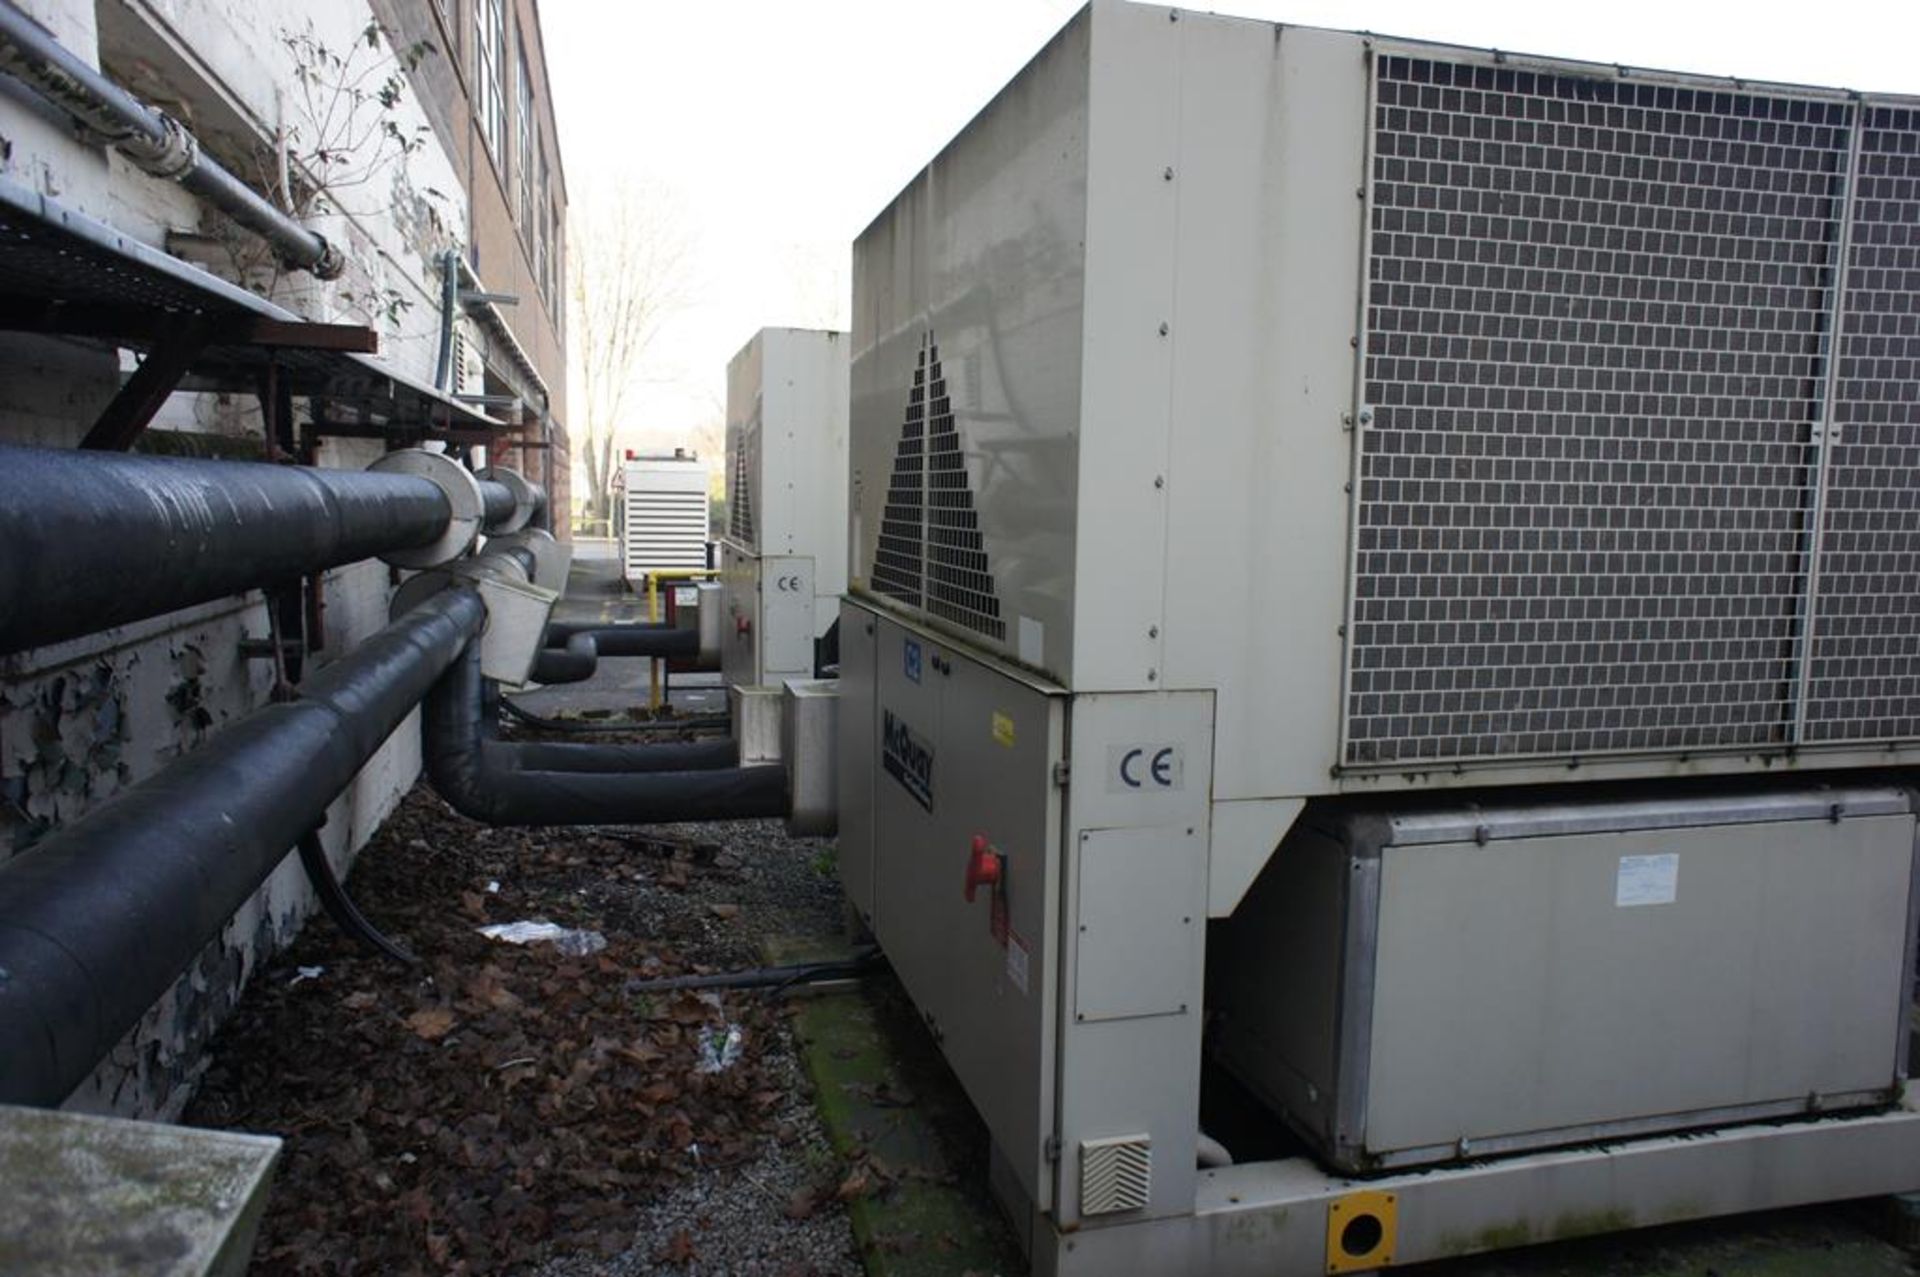 3 McQuay ALR 135.2 XN Air Conditioning Chillers, Year 2002. This Lot is Buyer to Remove. Please note - Image 10 of 32